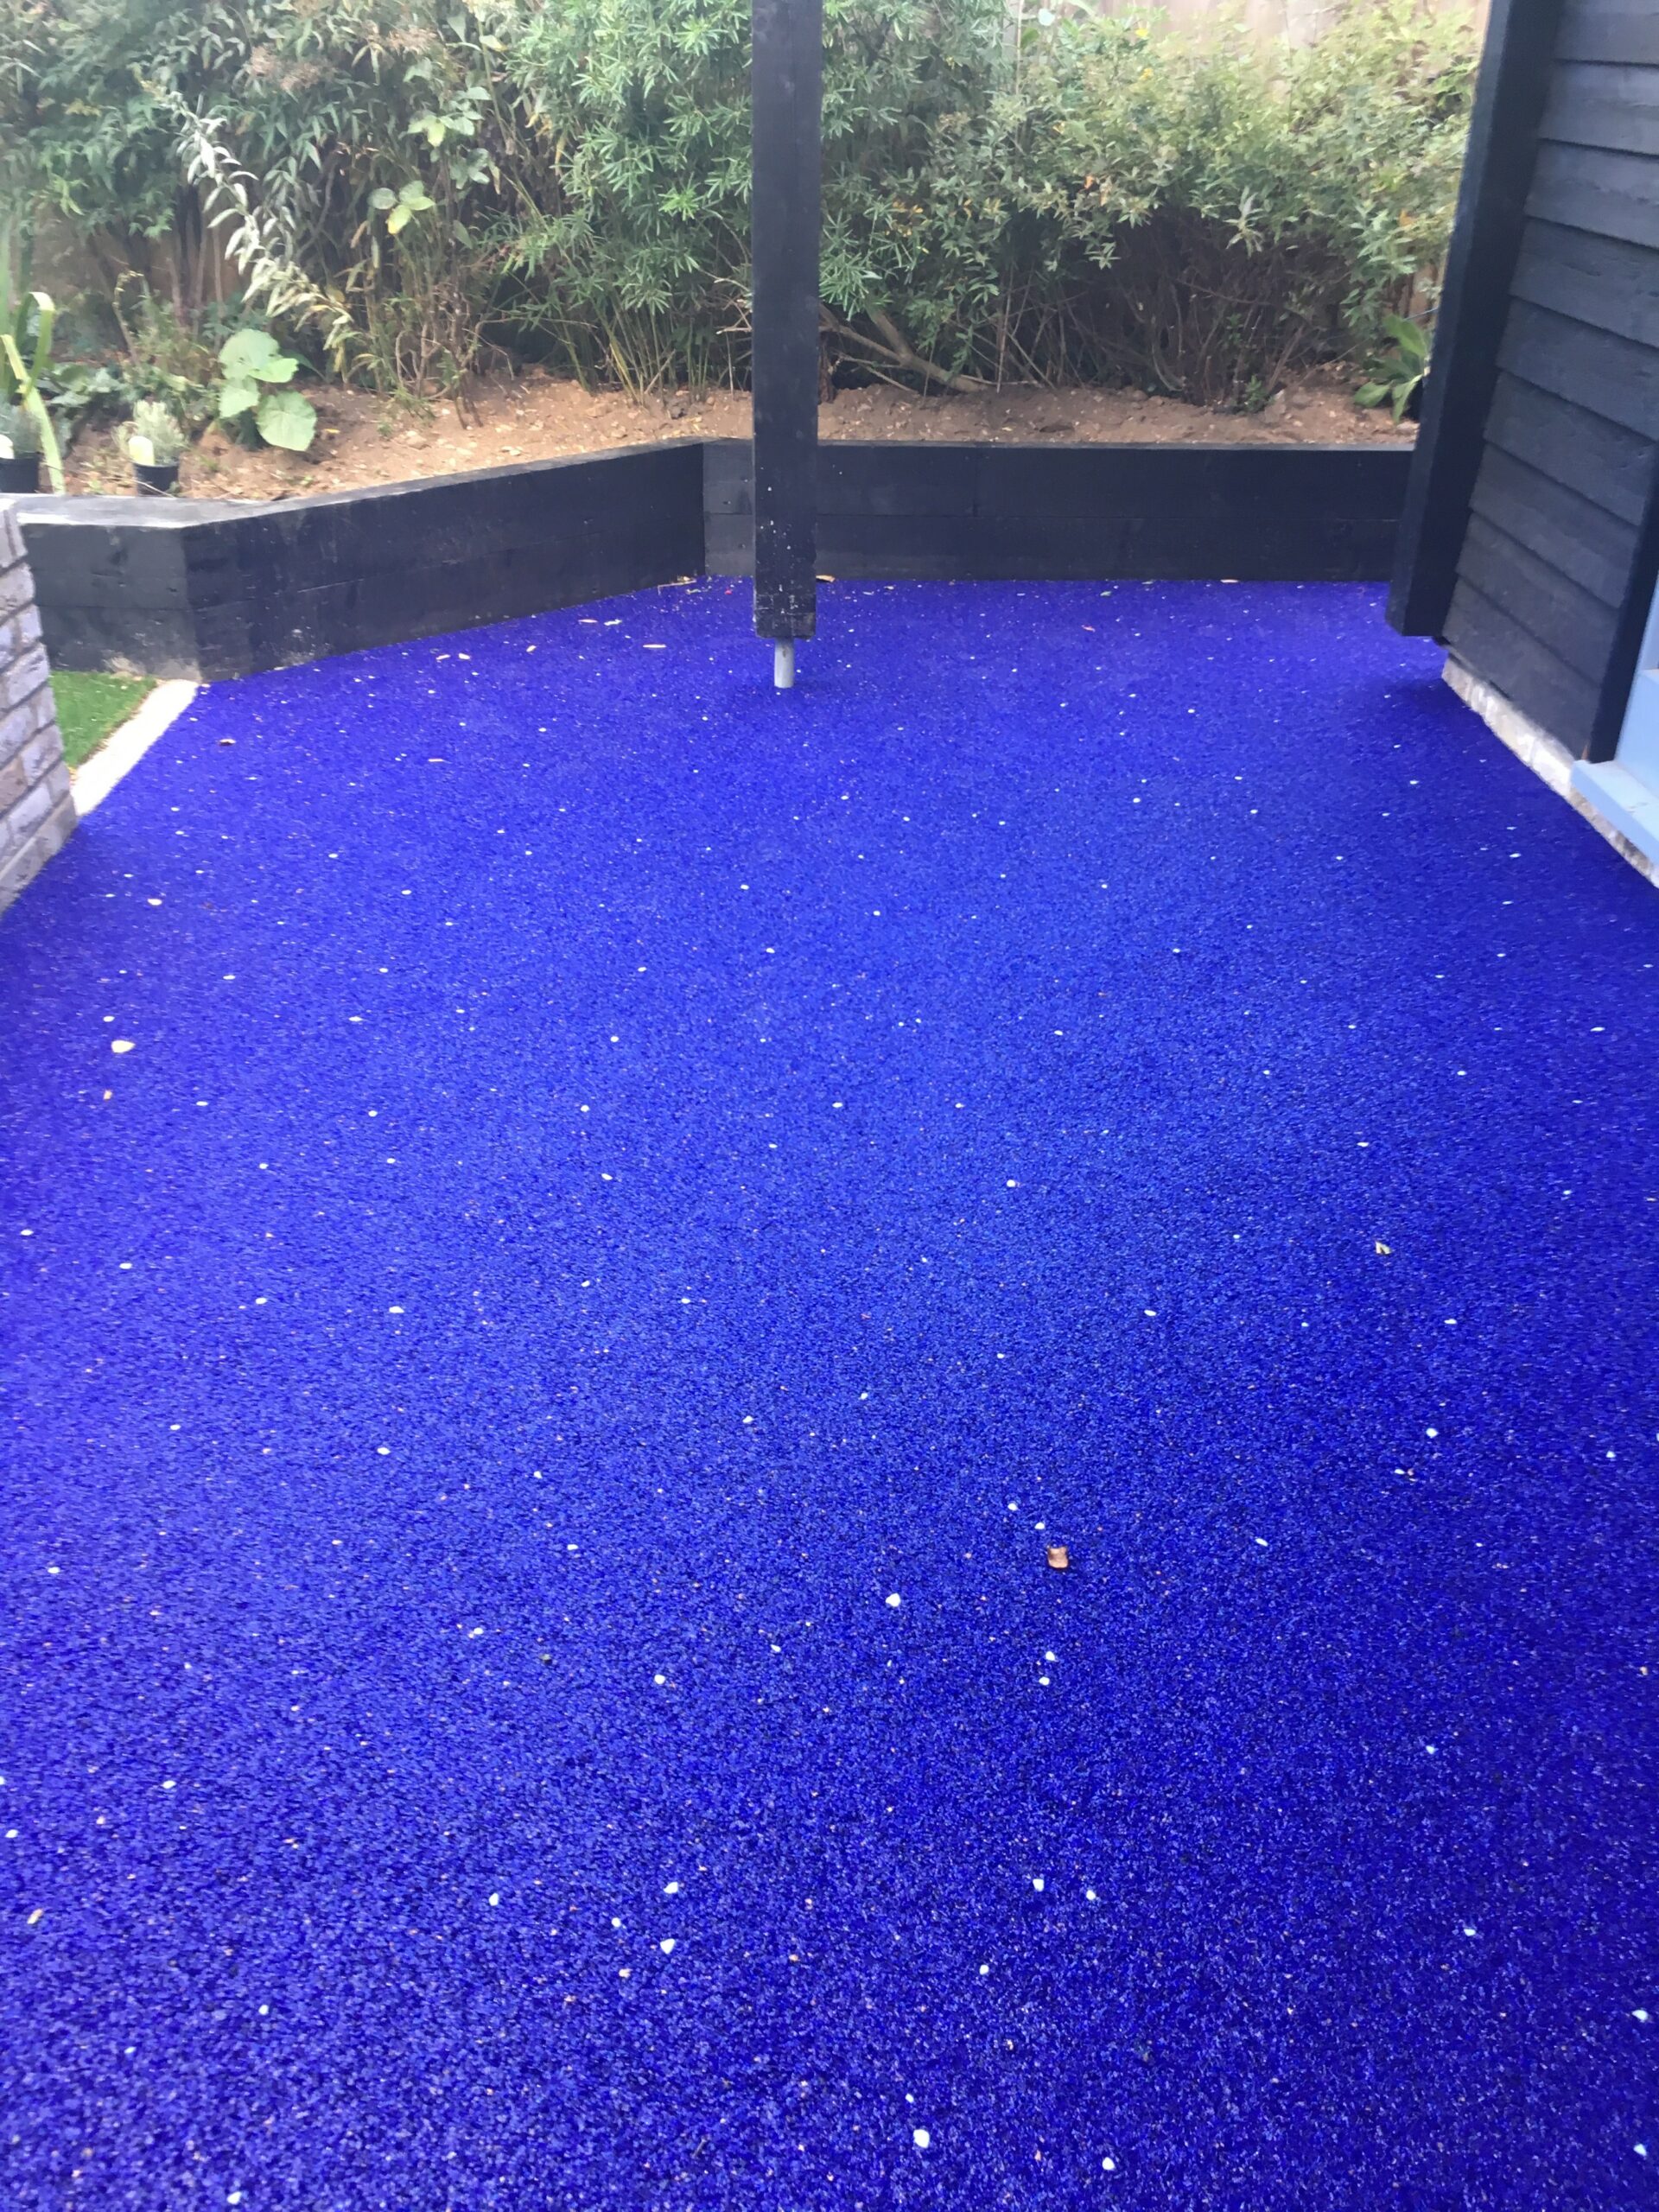 Electric blue, glow in the dark resin bound pathways around the property